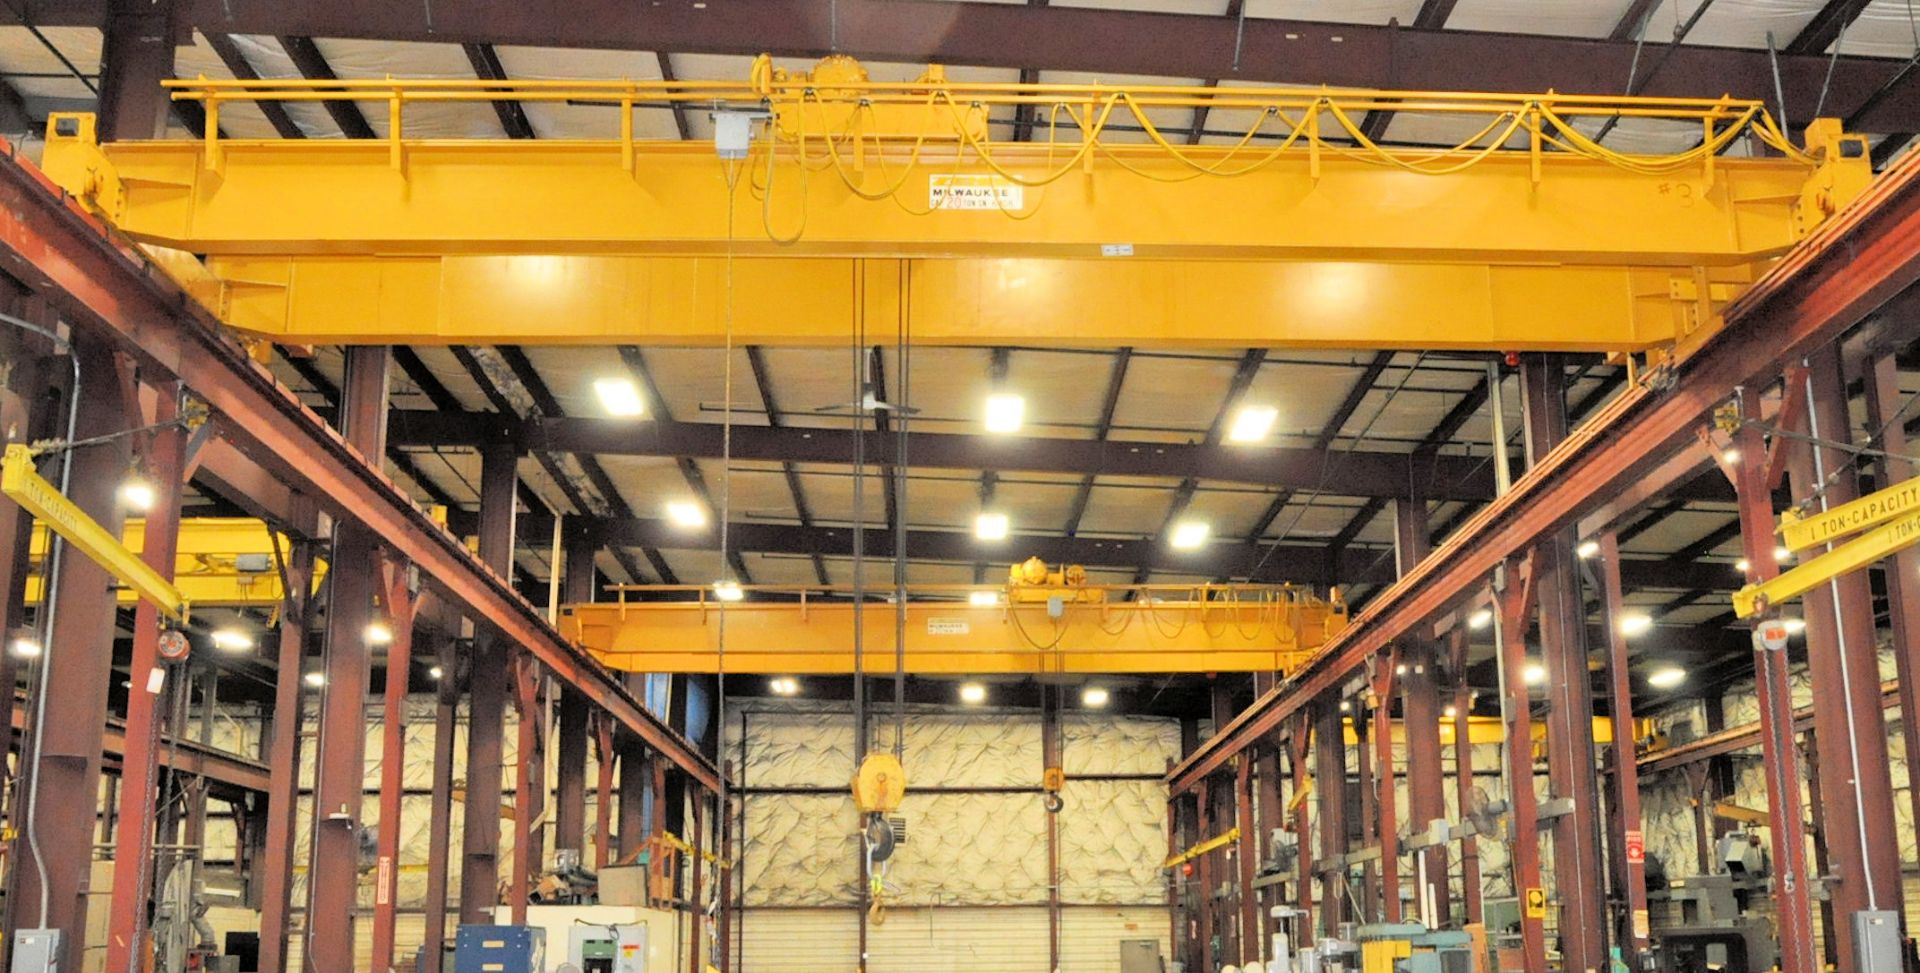 Zenar 20 Ton Overhead Crane, Span and Hoist Only, No Rails, Pendant Control, Overhung Crane and - Image 2 of 6